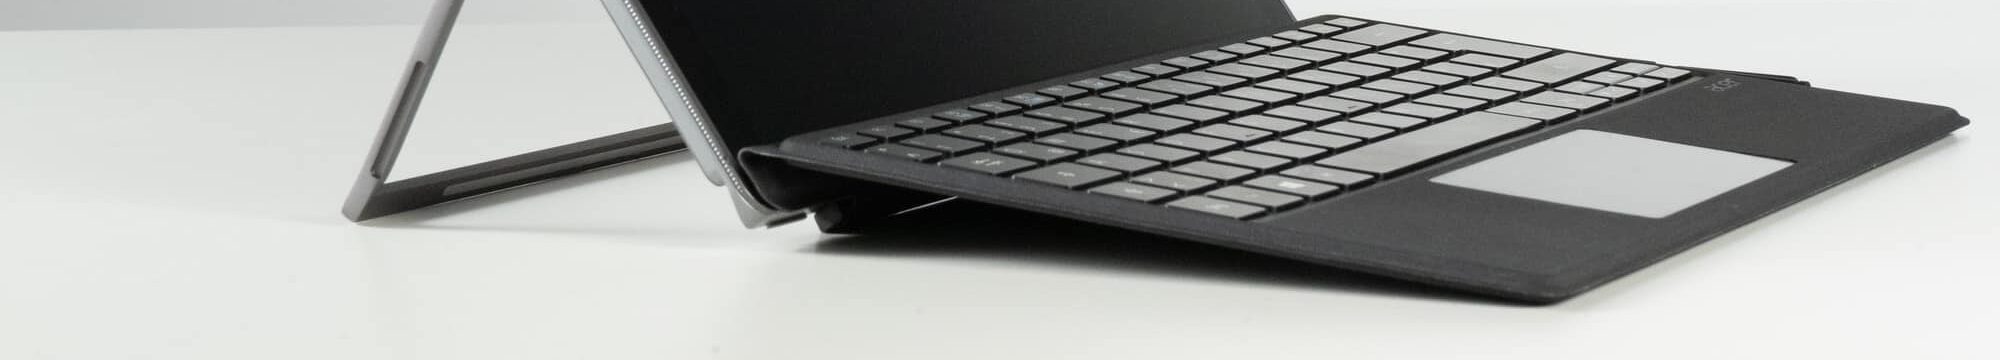 black and gray laptop computer with black screen